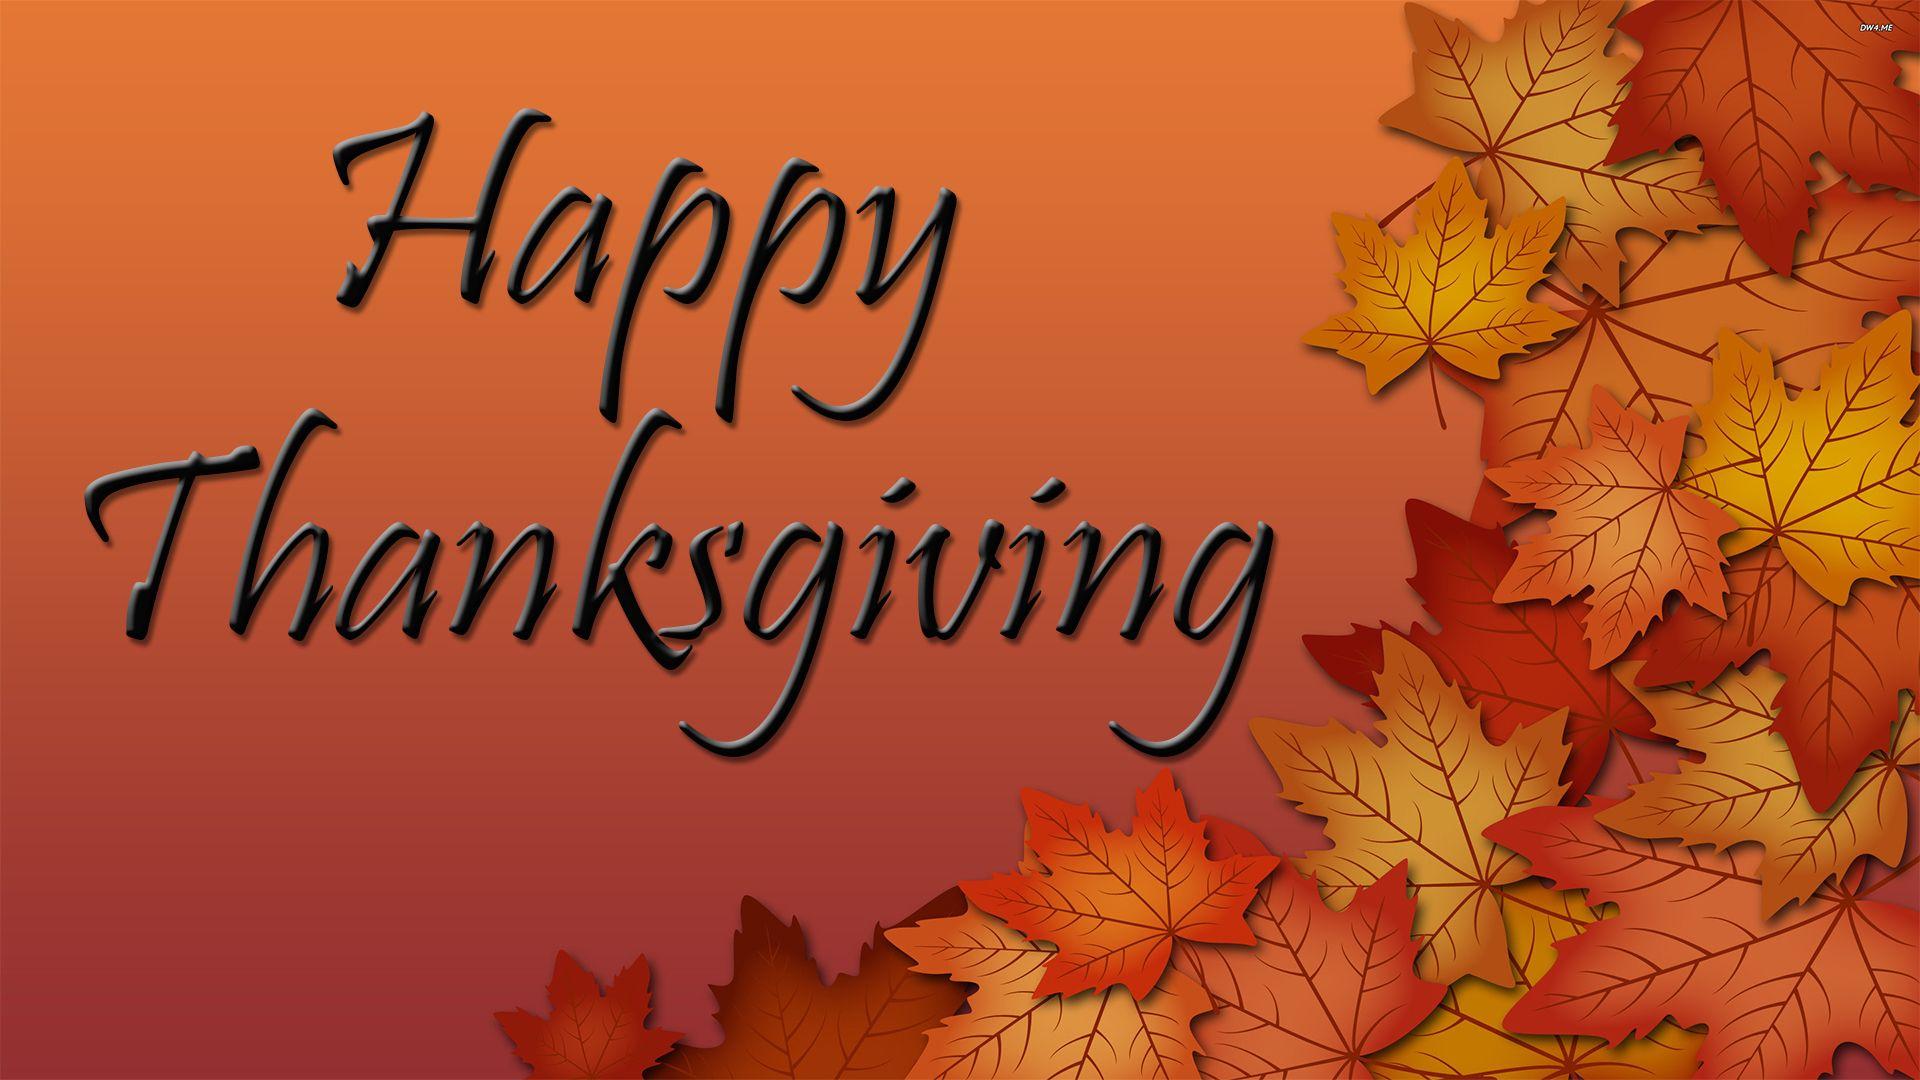 Happy Thanksgiving Image, Picture & Wallpaper